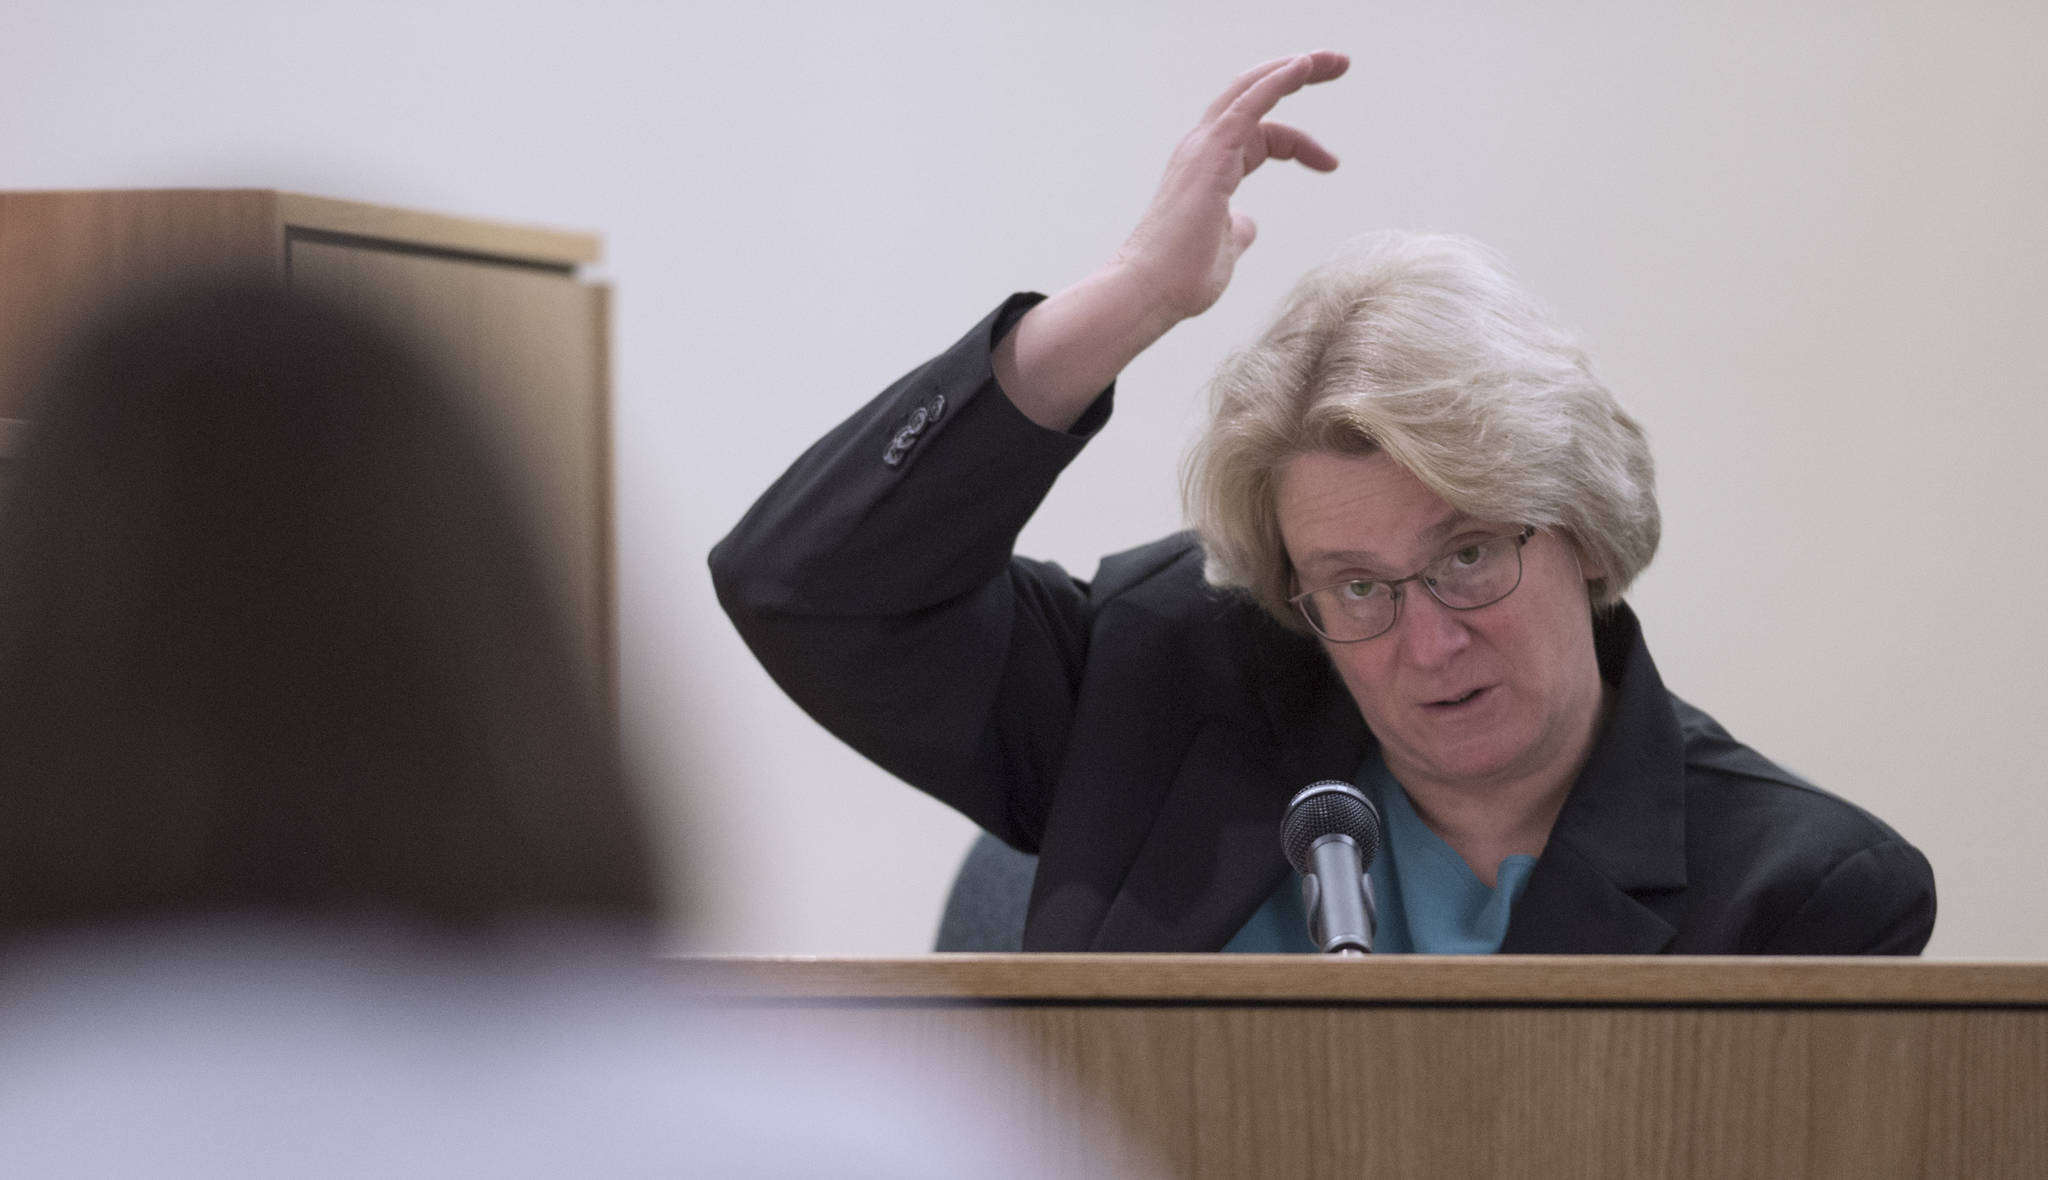 Deputy State Medical Examiner Cristin Rolf testifies in the trial of Mark De Simone in Juneau Superior Court on Thursday, May 3, 2018. De Simone is accused of killing Duilio Antonio “Tony” Rosales during a hunting trip in Excursion Inlet in 2016. (Michael Penn | Juneau Empire)